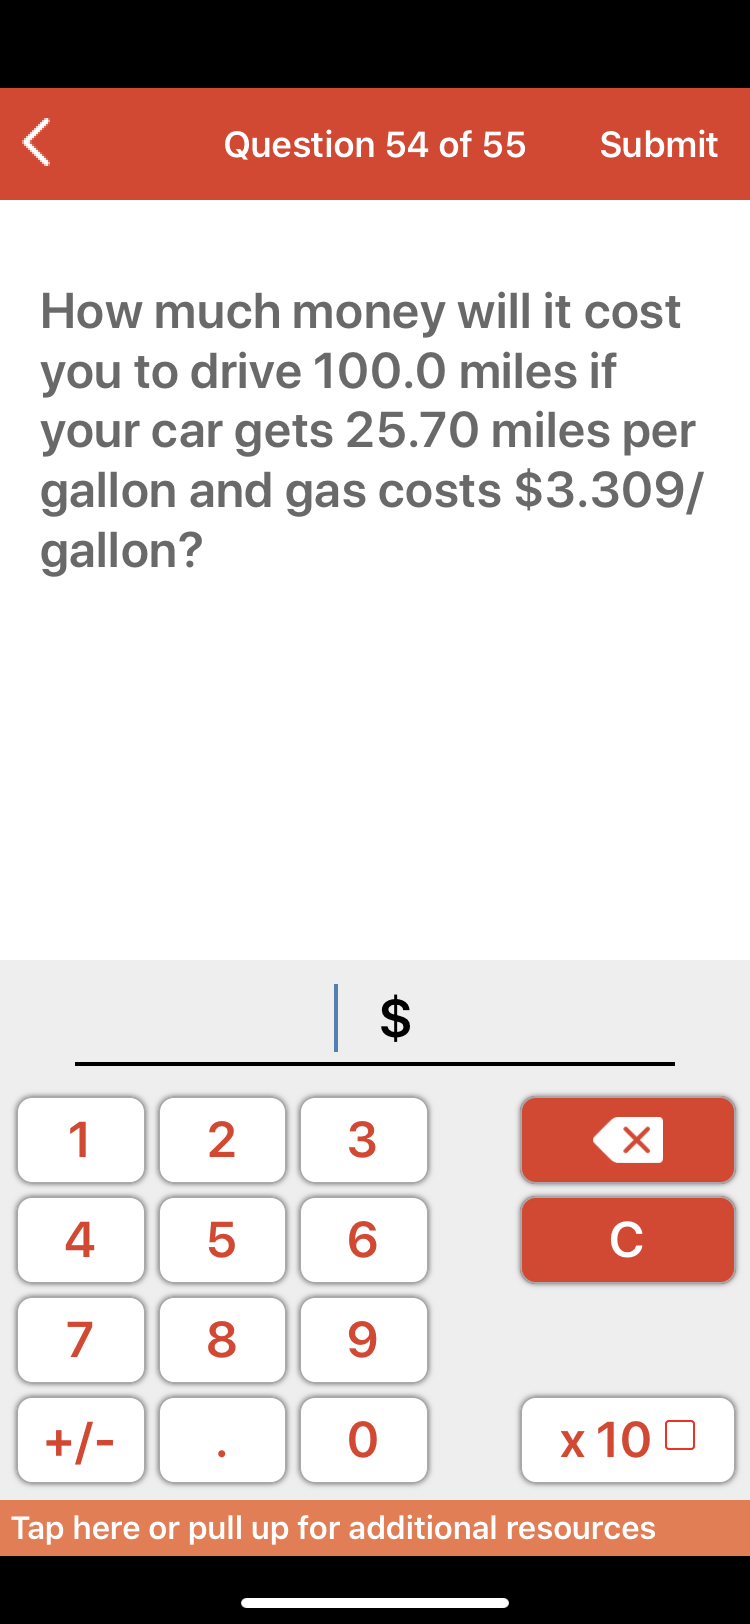 How much money will it cost
you to drive 100.0 miles if
your car gets 25.70 miles per
gallon and gas costs $3.309/
gallon?
